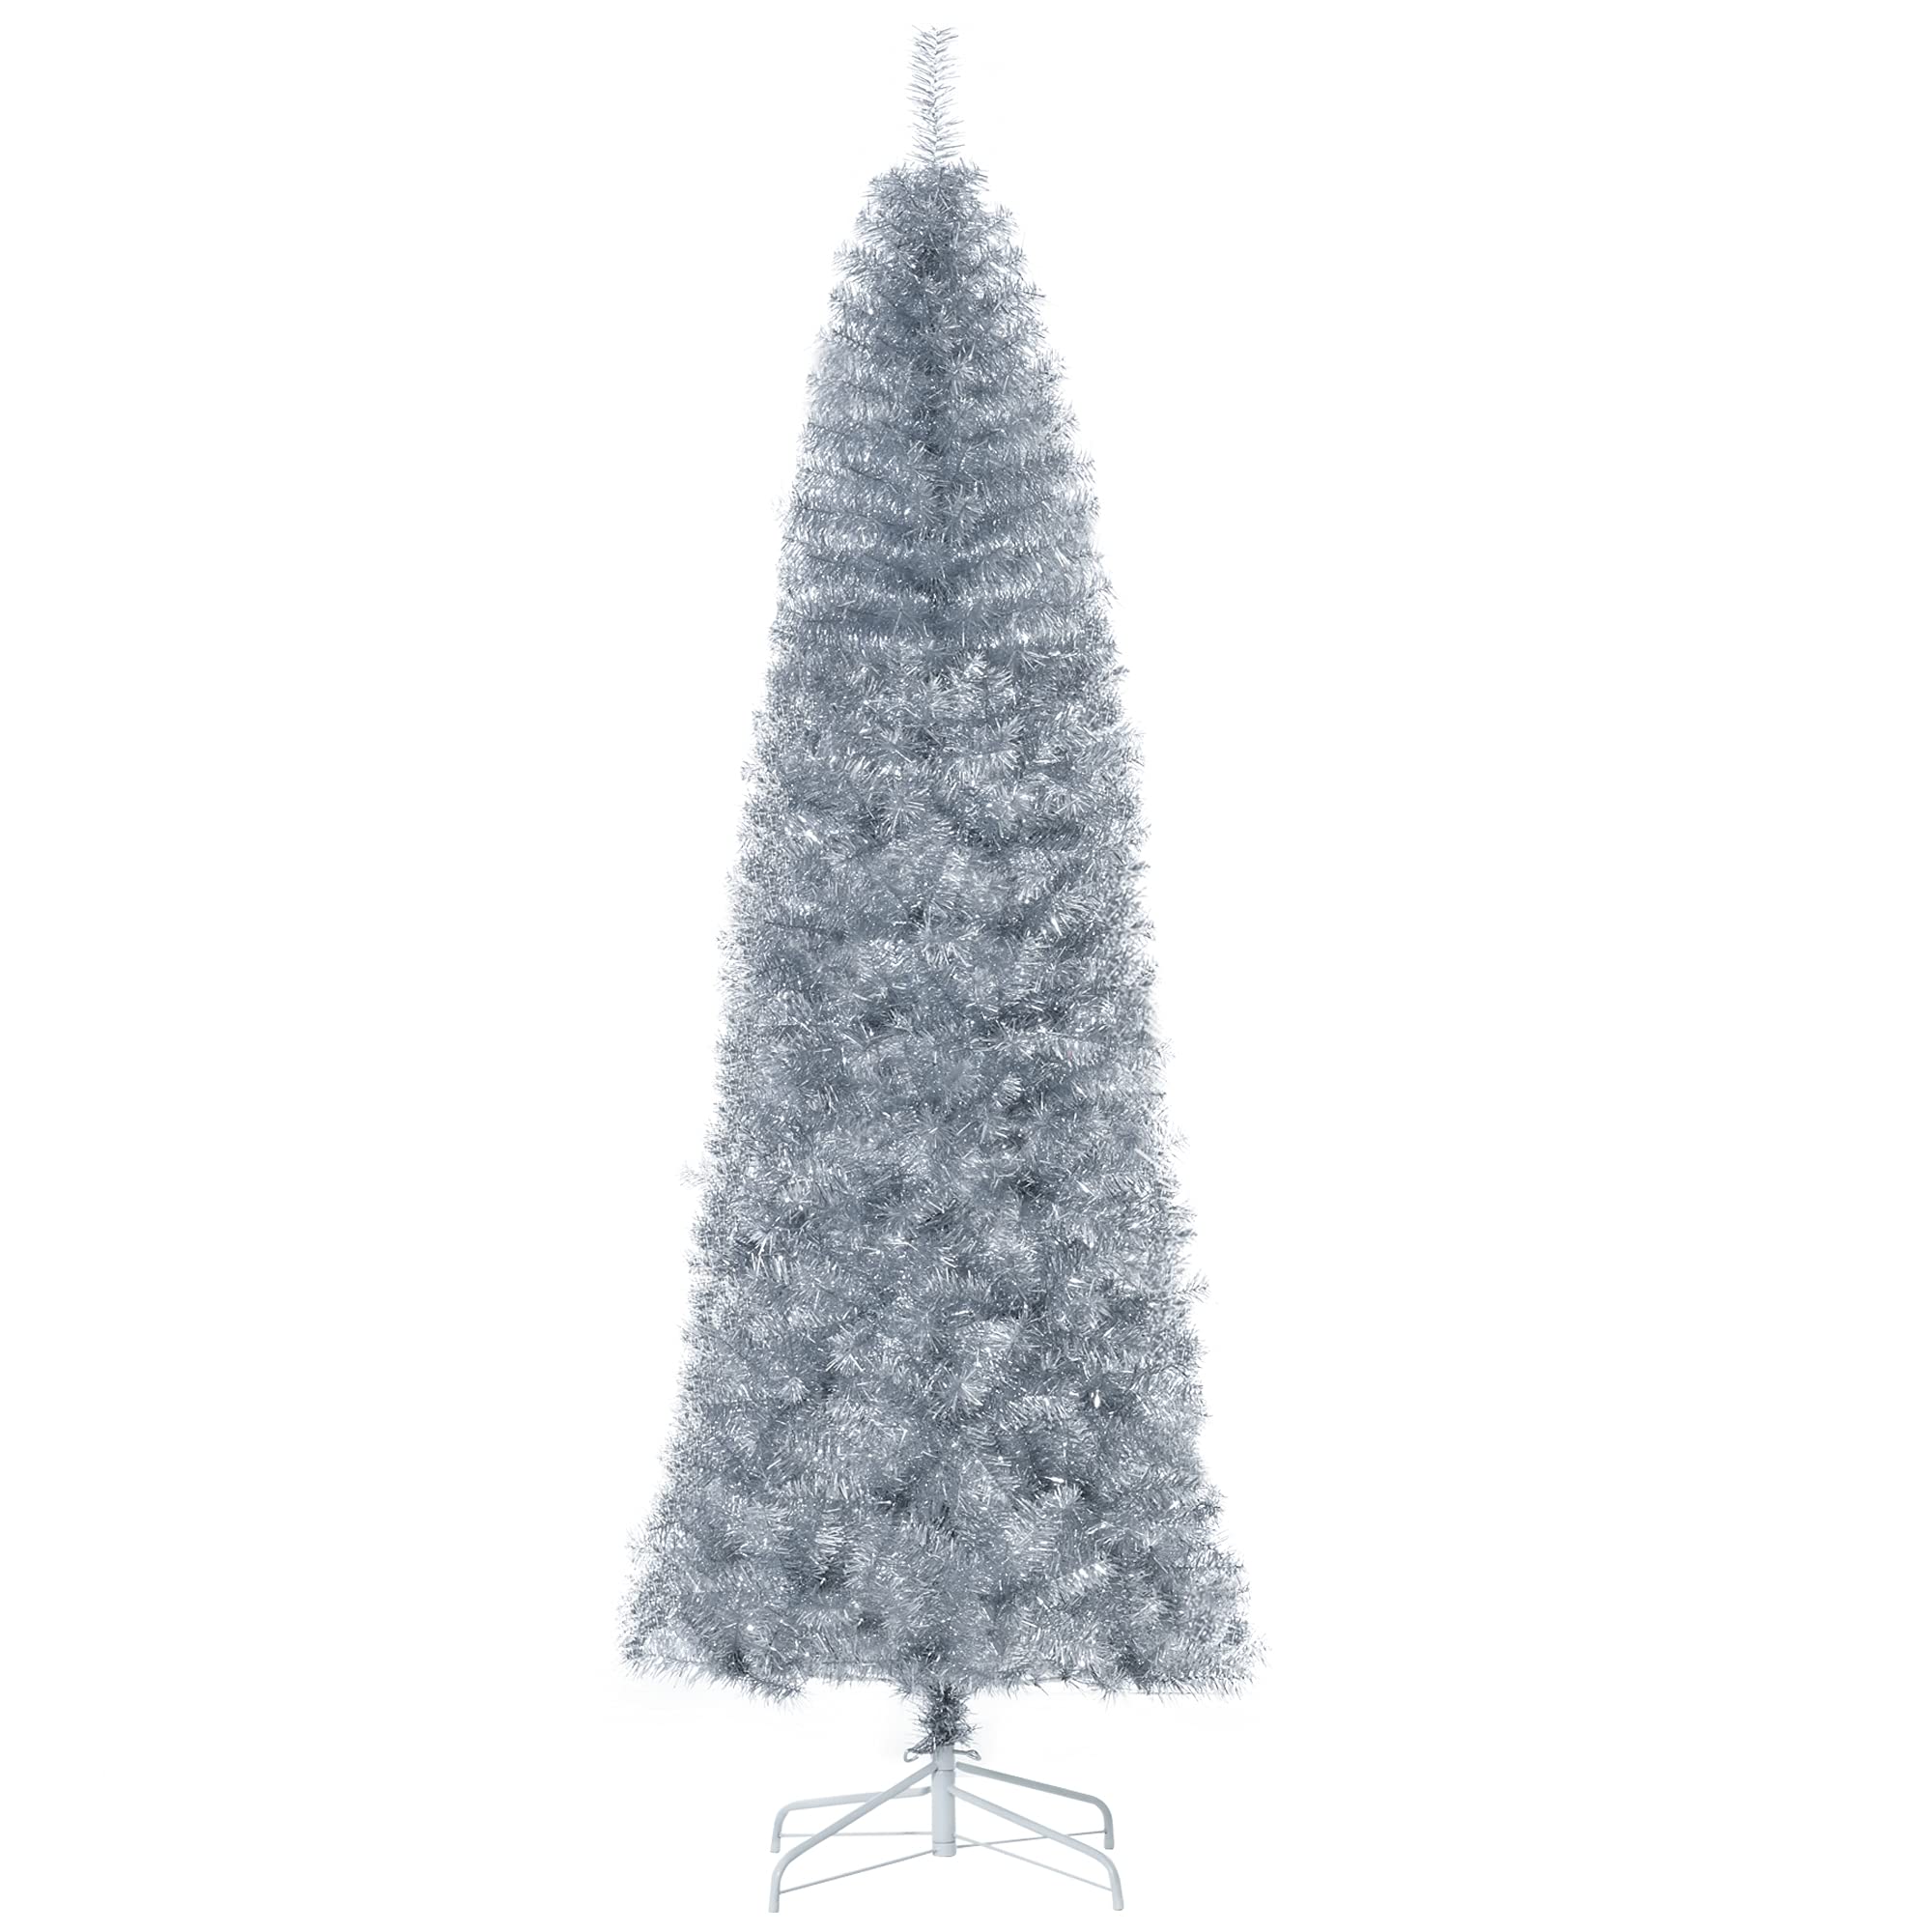 HOMCOM 7ft Unlit Slim Douglas Fir Artificial Christmas Tree, Holiday Home Decoration with 818 Realistic Branches Tips, Silver